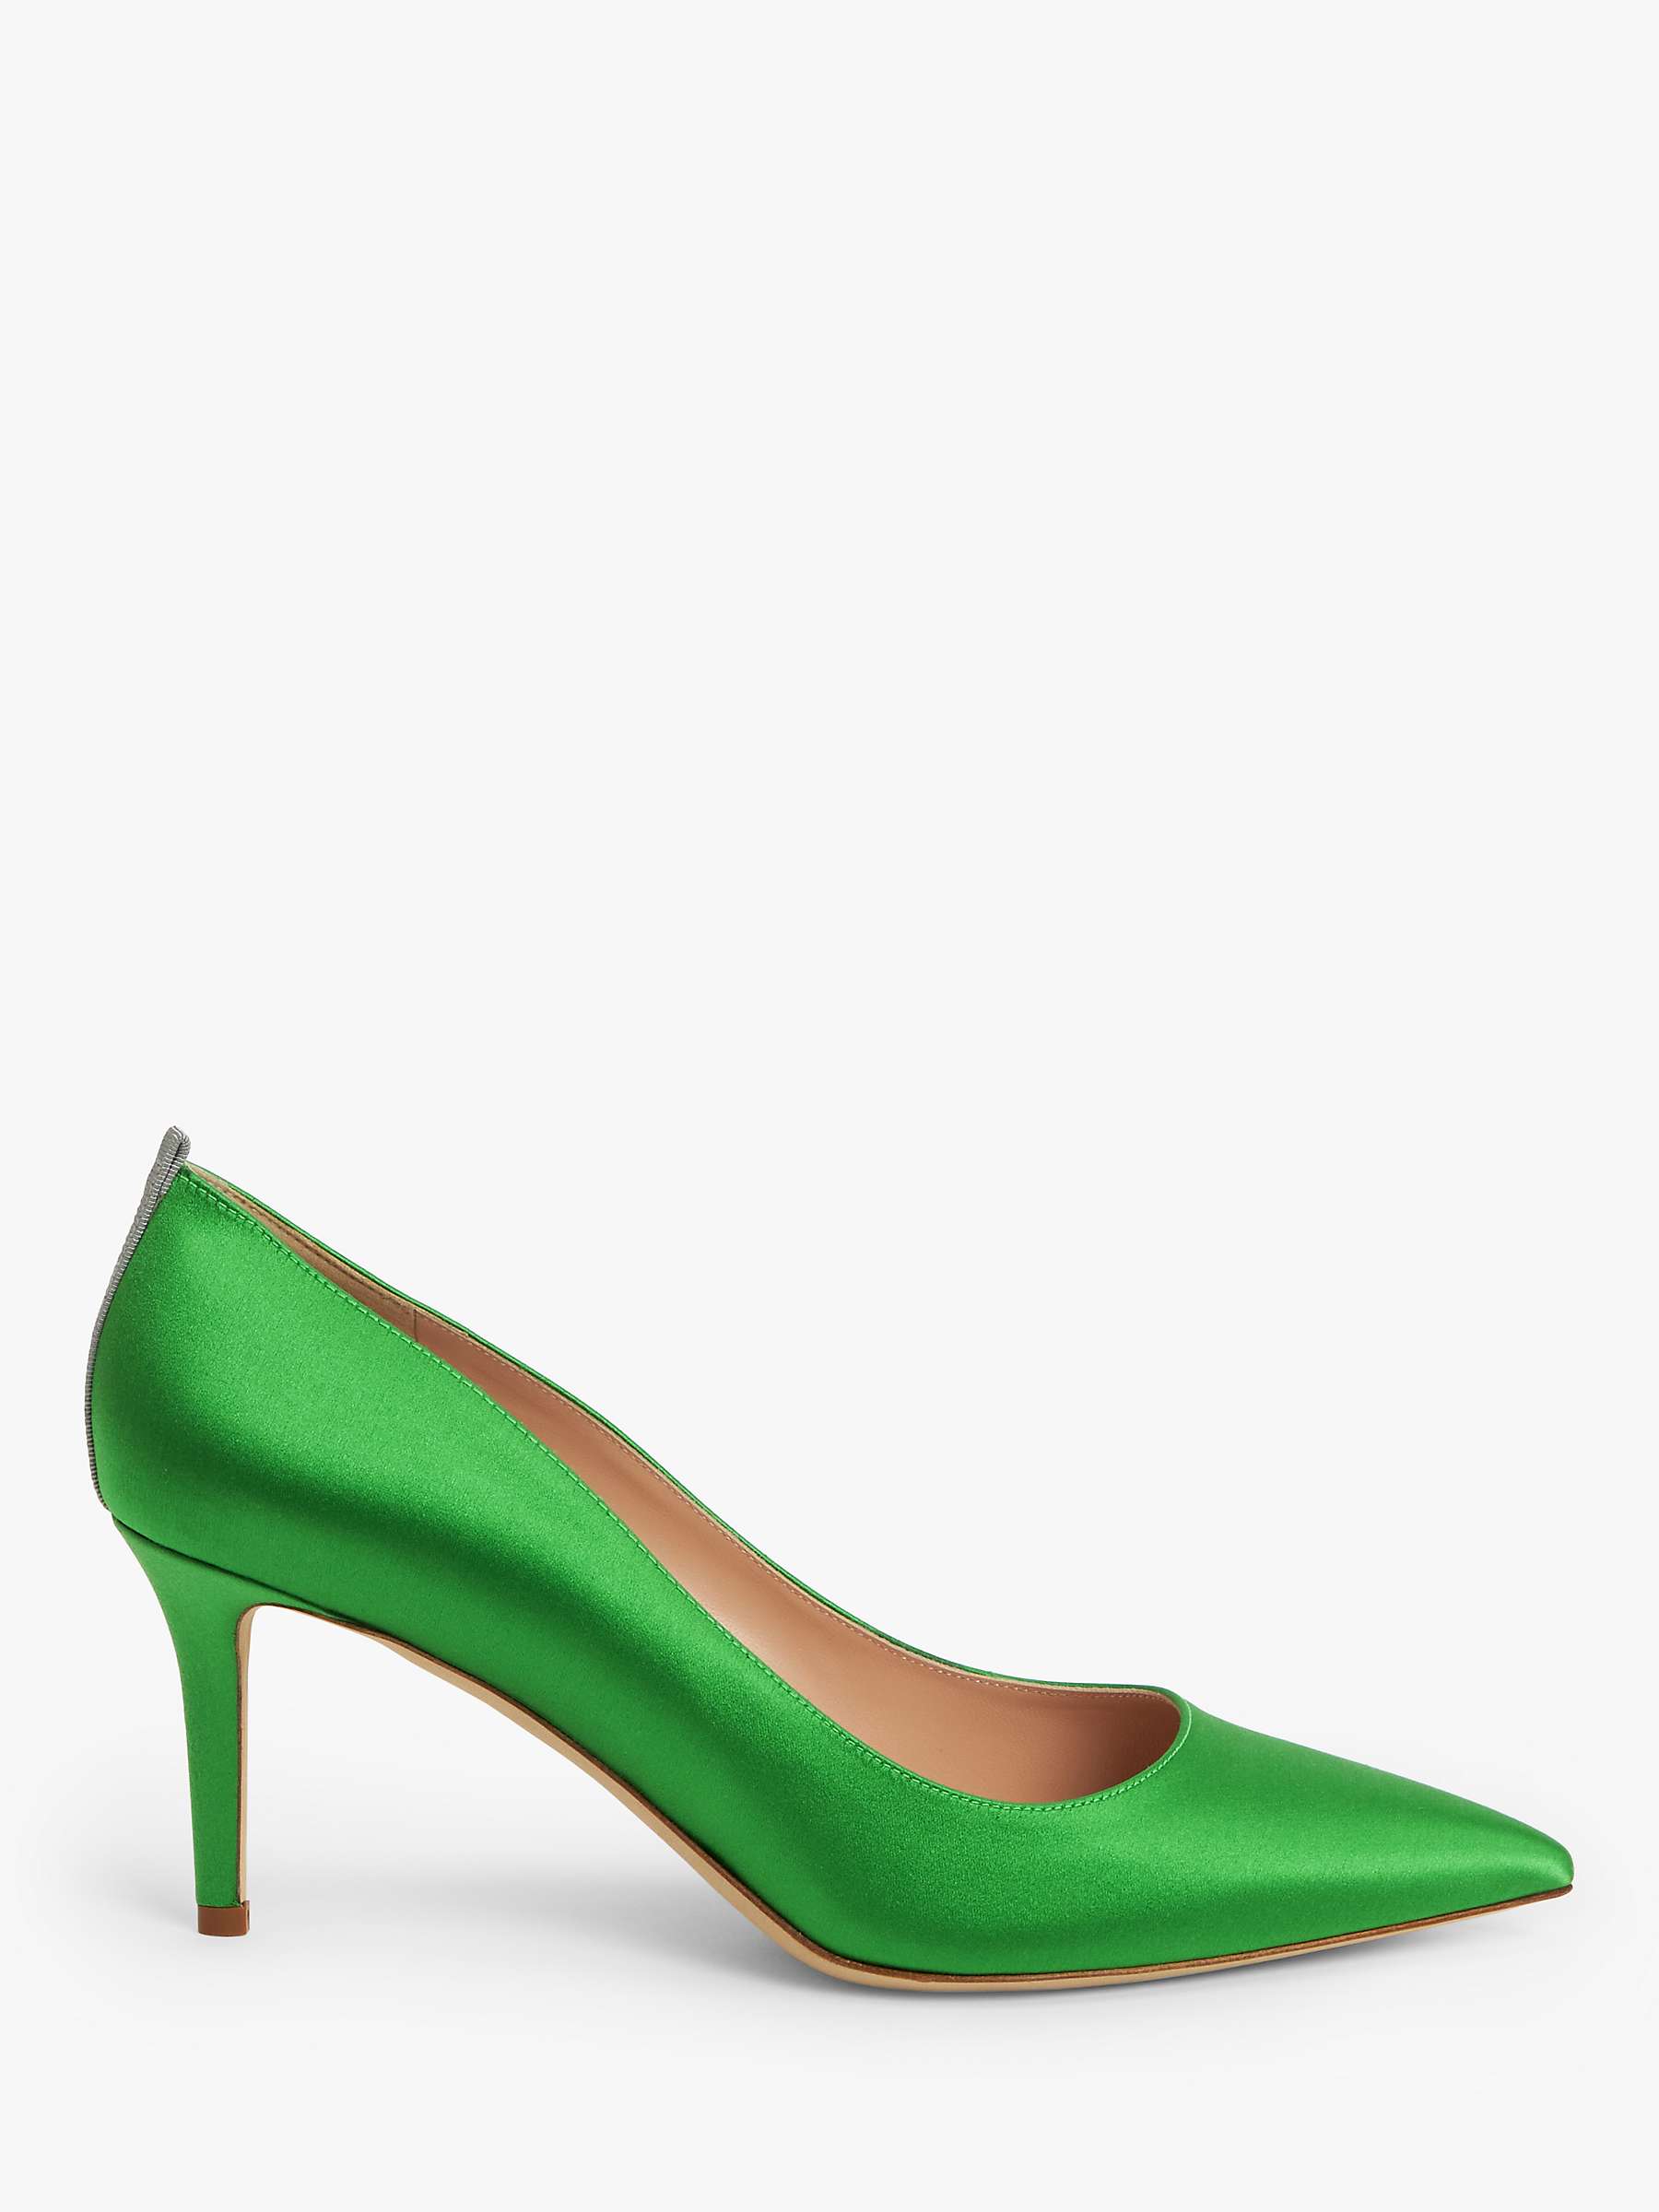 Buy SJP by Sarah Jessica Parker Fawn 70 Satin Court Shoes Online at johnlewis.com